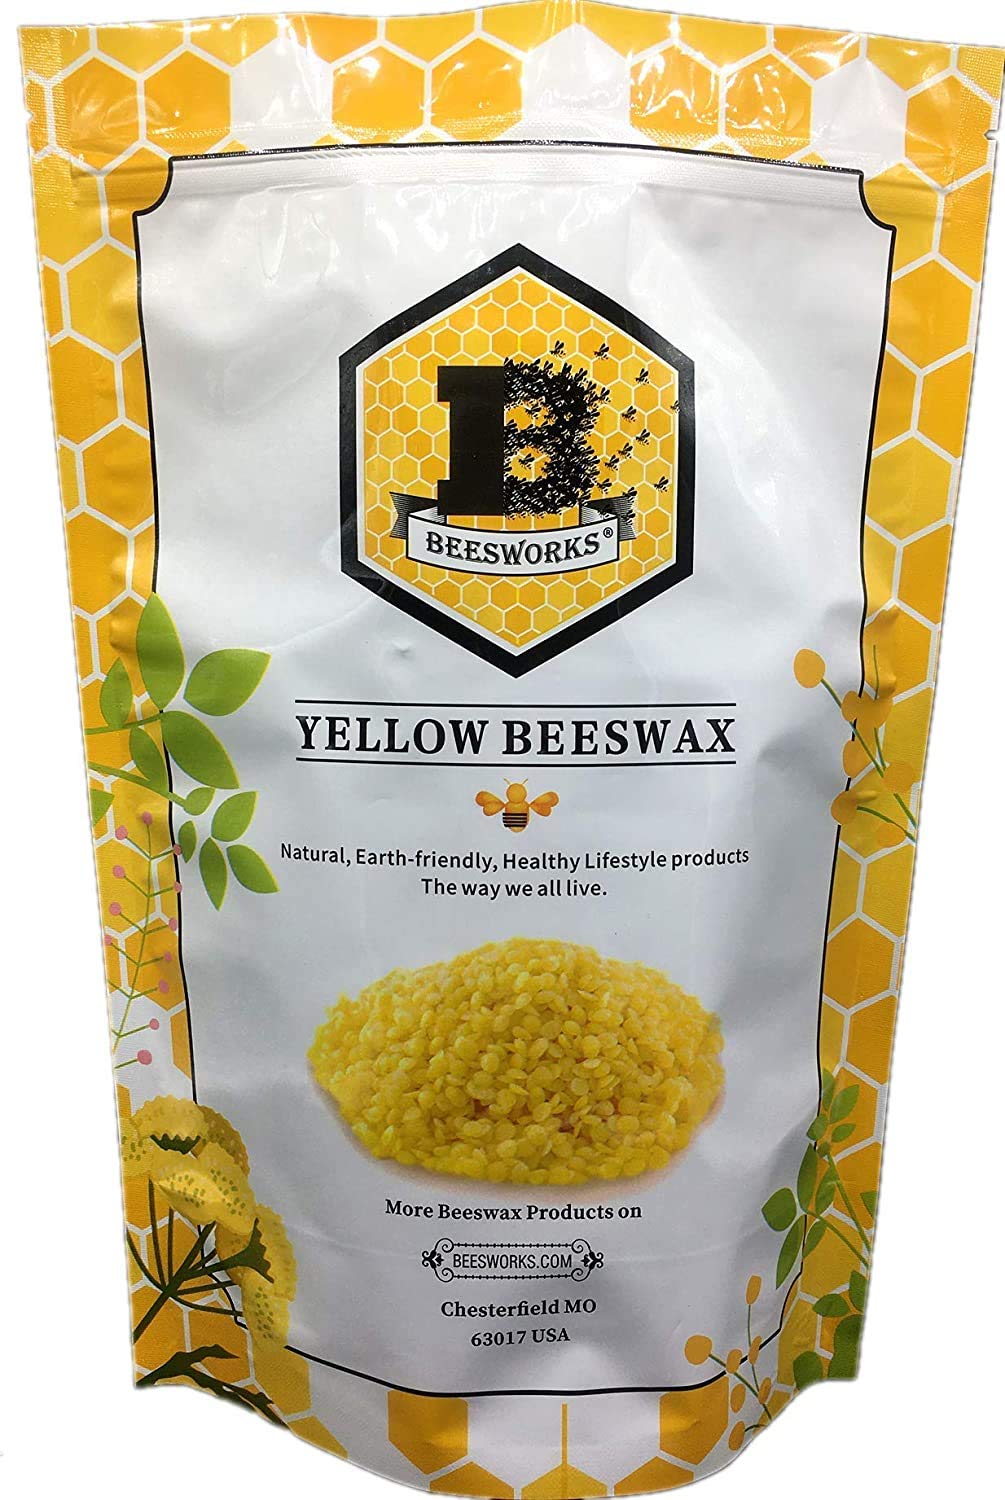 Beesworks Yellow Beeswax Pellets - 2 lb 1